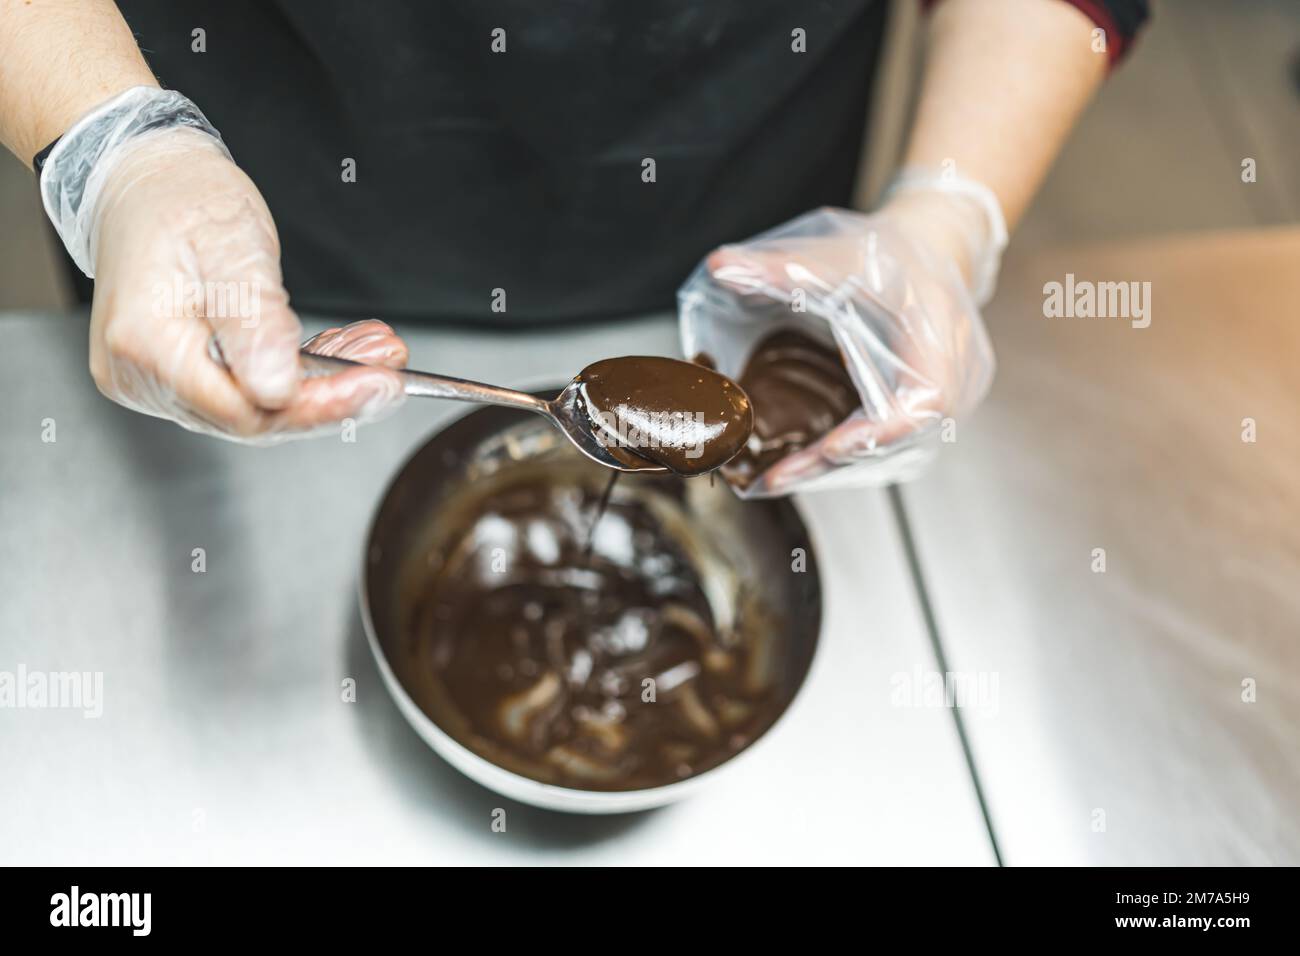 Top view a expert putting chocolate icing into a pastry bag form a metal bowl with a spoon. High quality photo Stock Photo